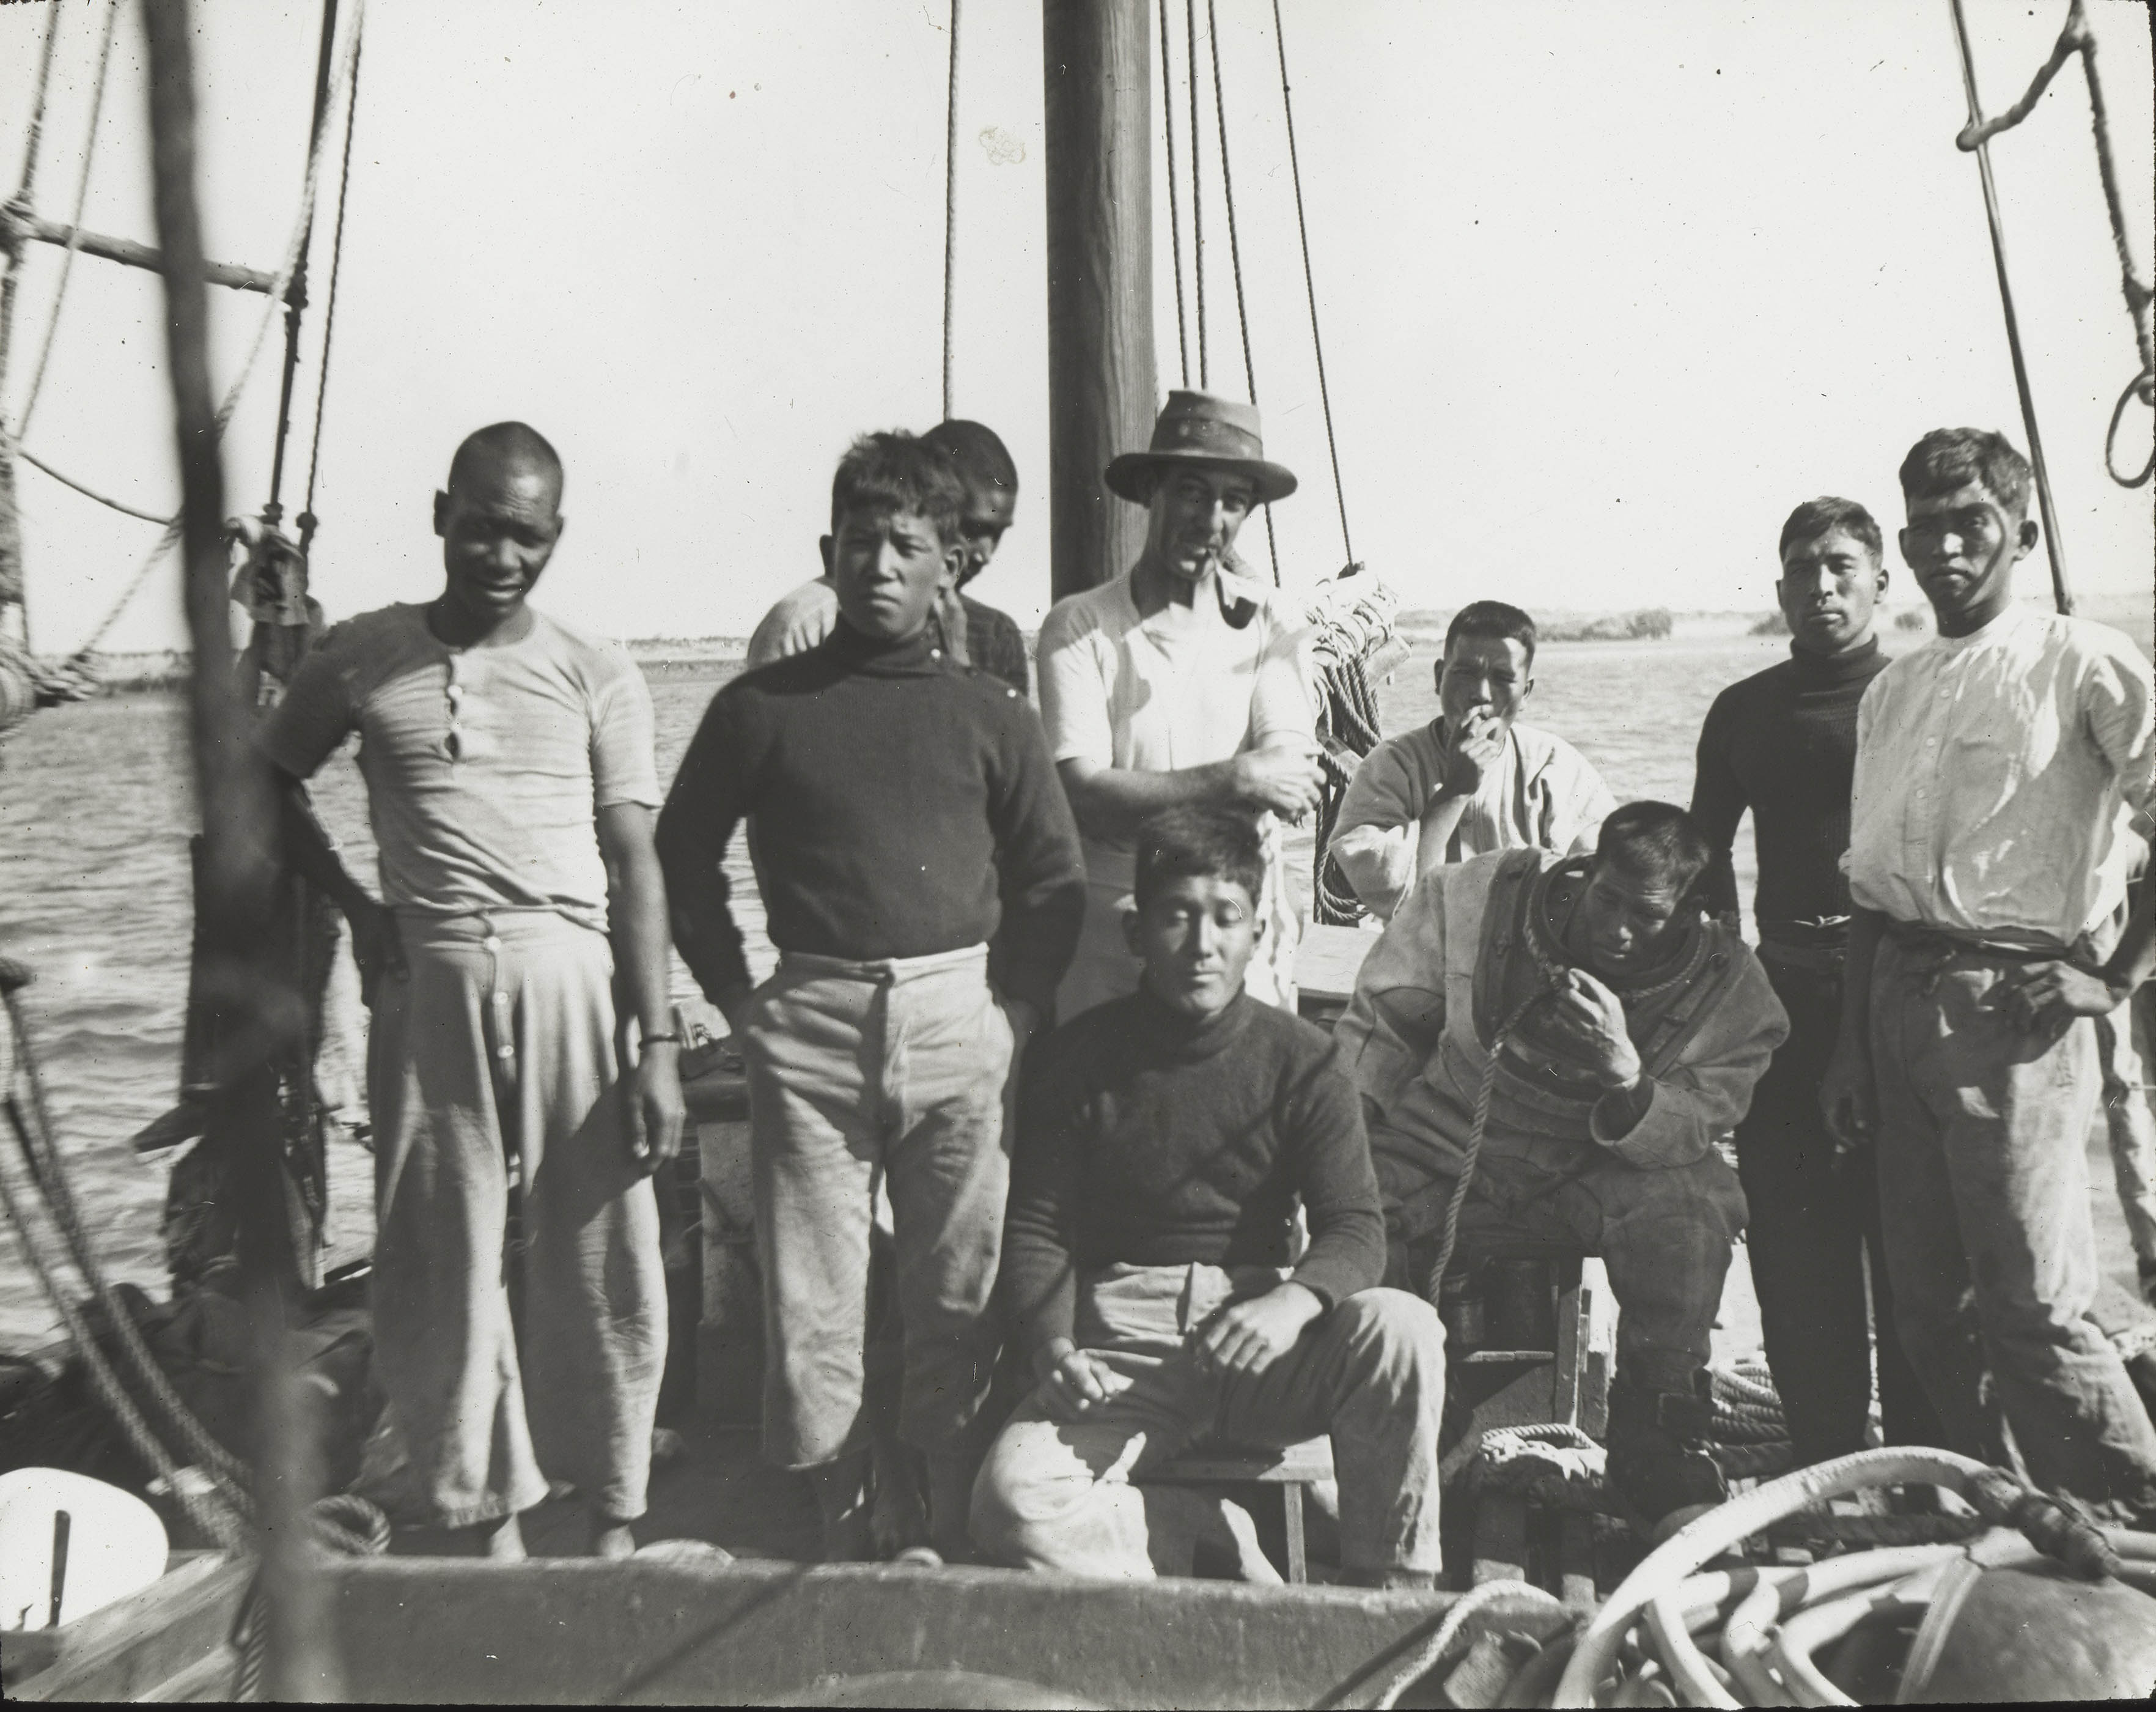 Japanese pearl divers with their Australian boat owner, Victor Kepert (wearing the hat), Broome, about 1914 or early 1920s.